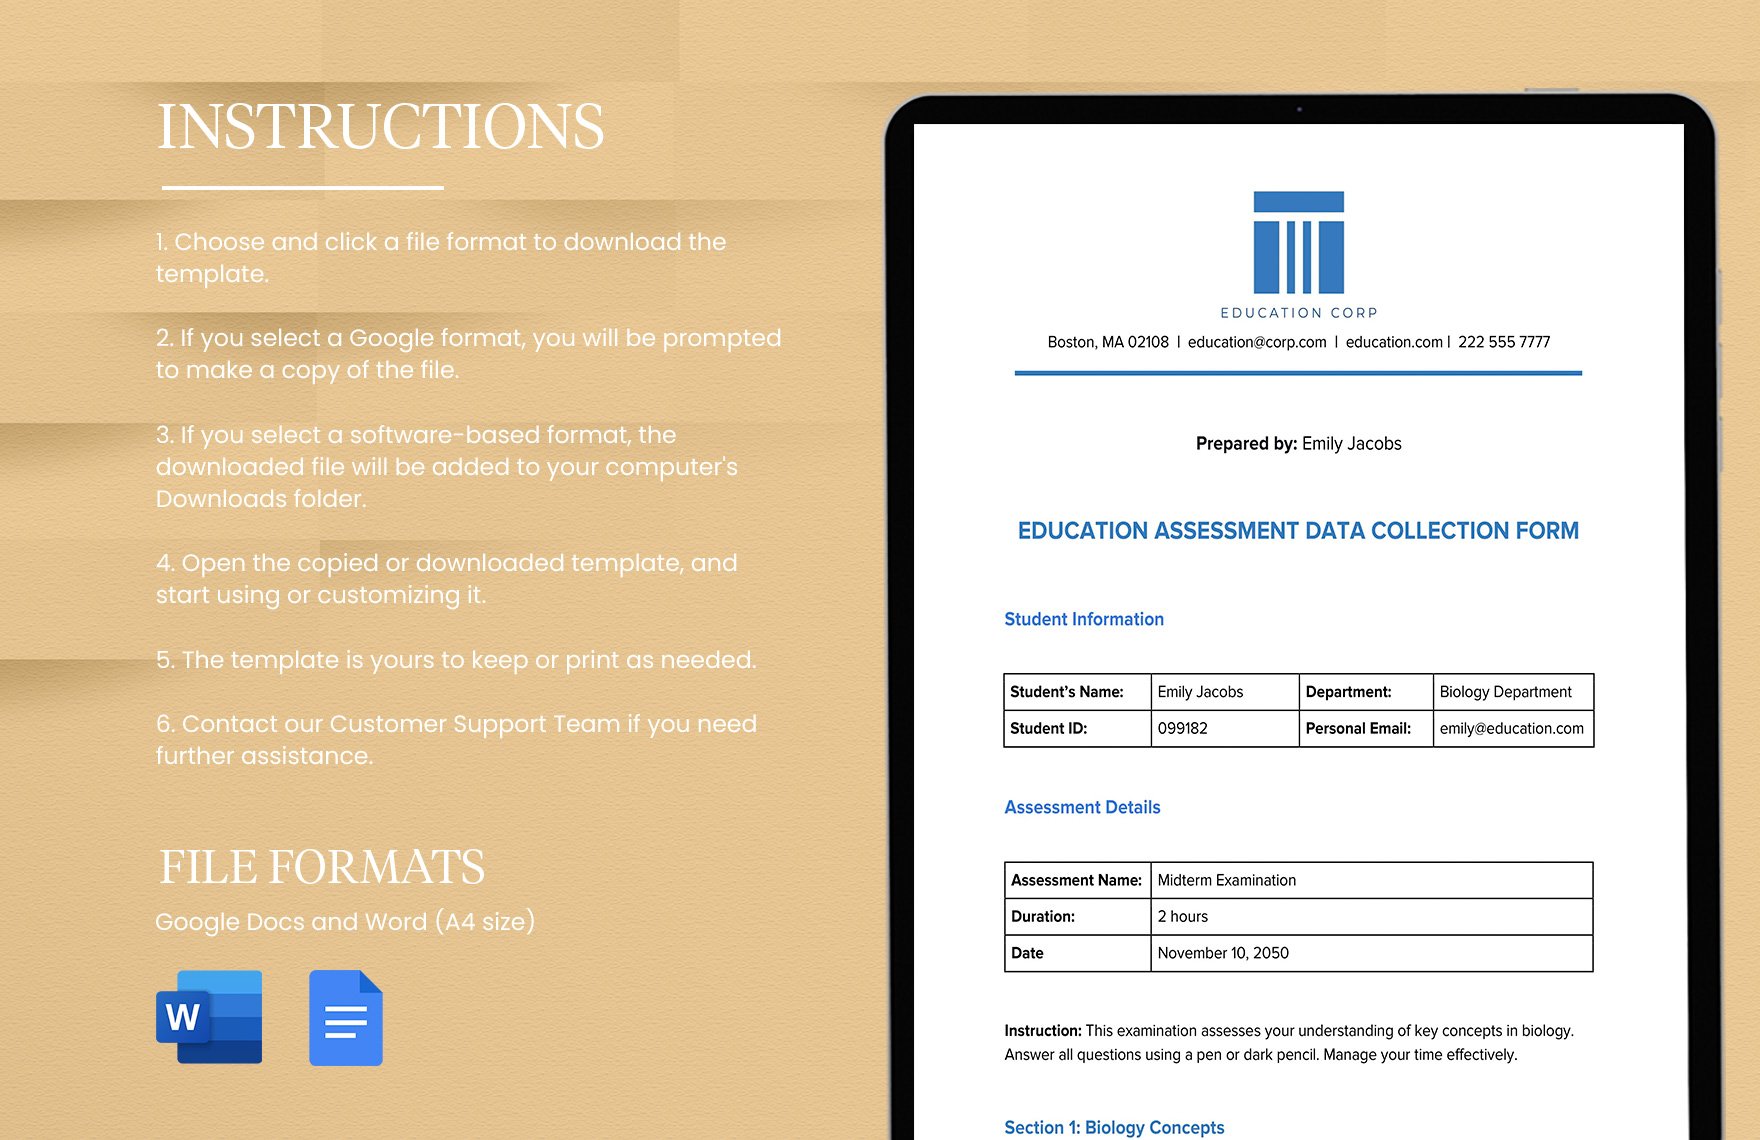 Education Assessment Data Collection Form 